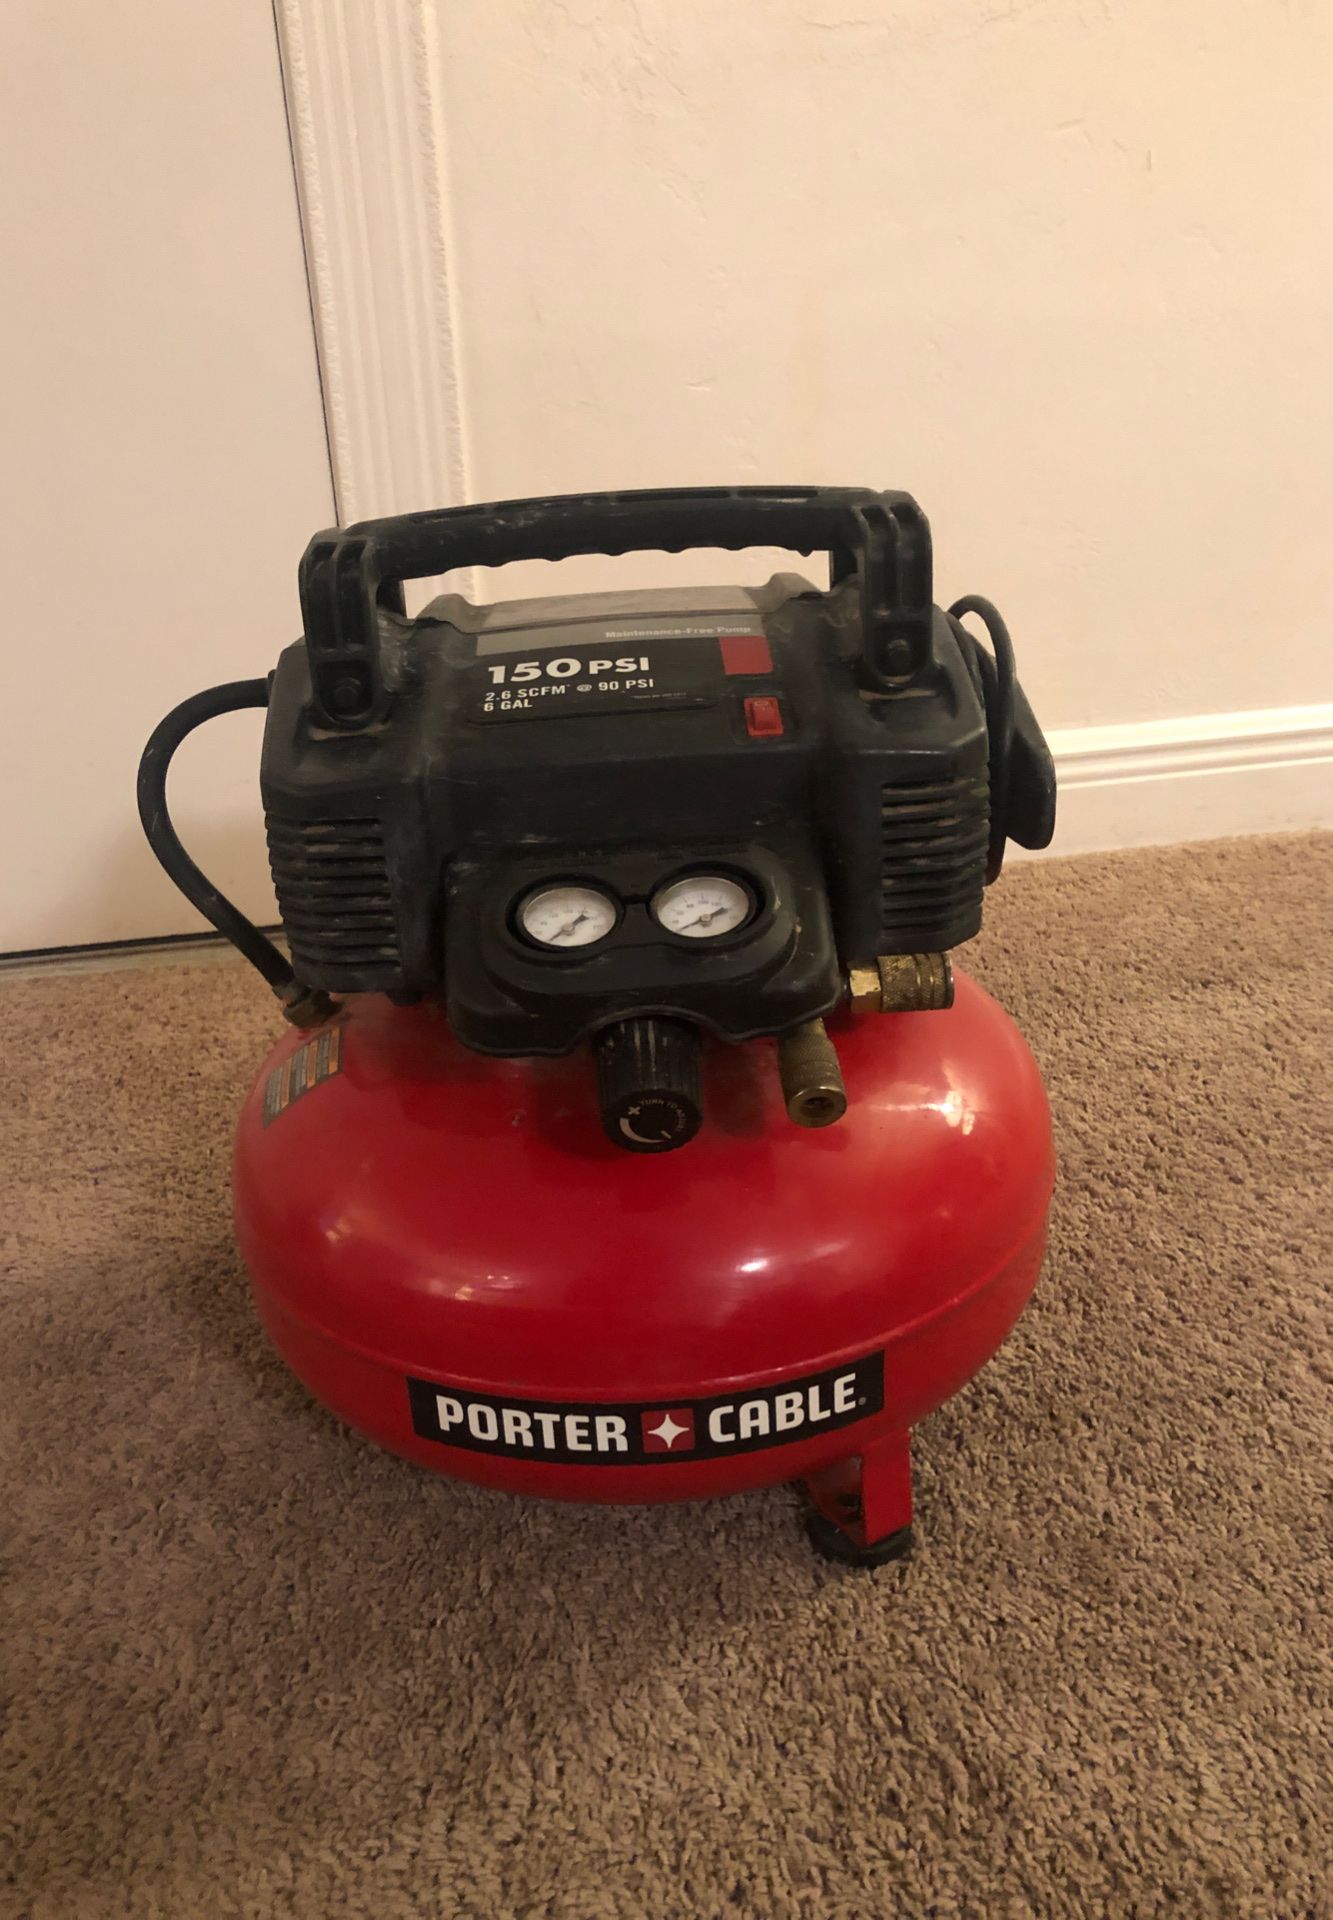 Porter-Cable C2002 Air Compressor, 6 gal, 150 psi, 2.6 scfm at 90 psi Oil-free pump design for reliability and no maintenance. Low amp motor starts e